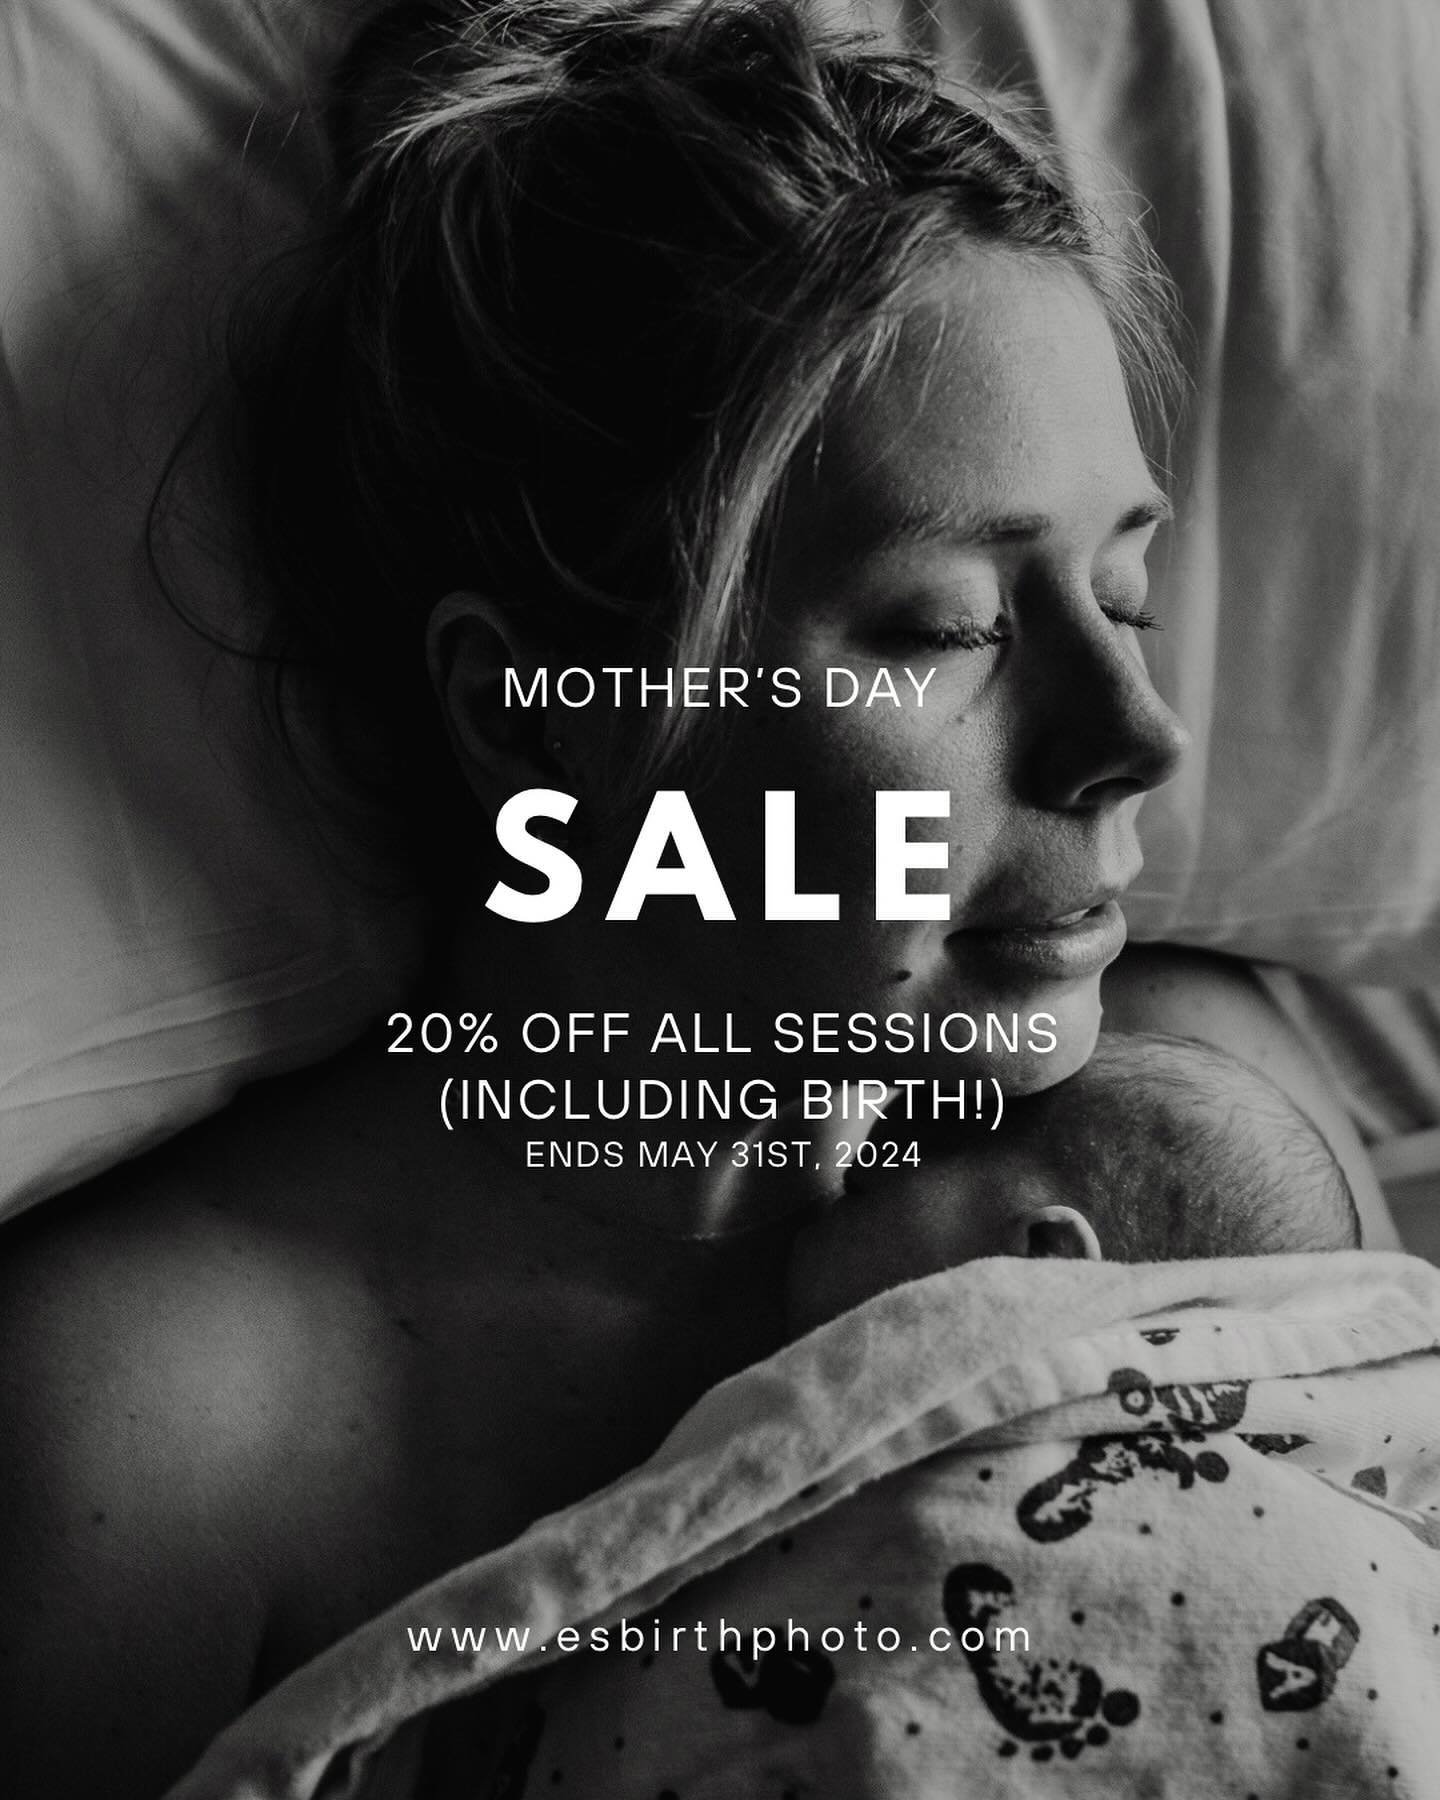 Happy Mother&rsquo;s Day! It&rsquo;s time for my biggest sale of the year to celebrate all the moms and moms-to-be! 🎉

20% off your entire contract now until May 31st
(ALL SESSIONS- yes, including BIRTH!)

My birth calendar is starting to book up he